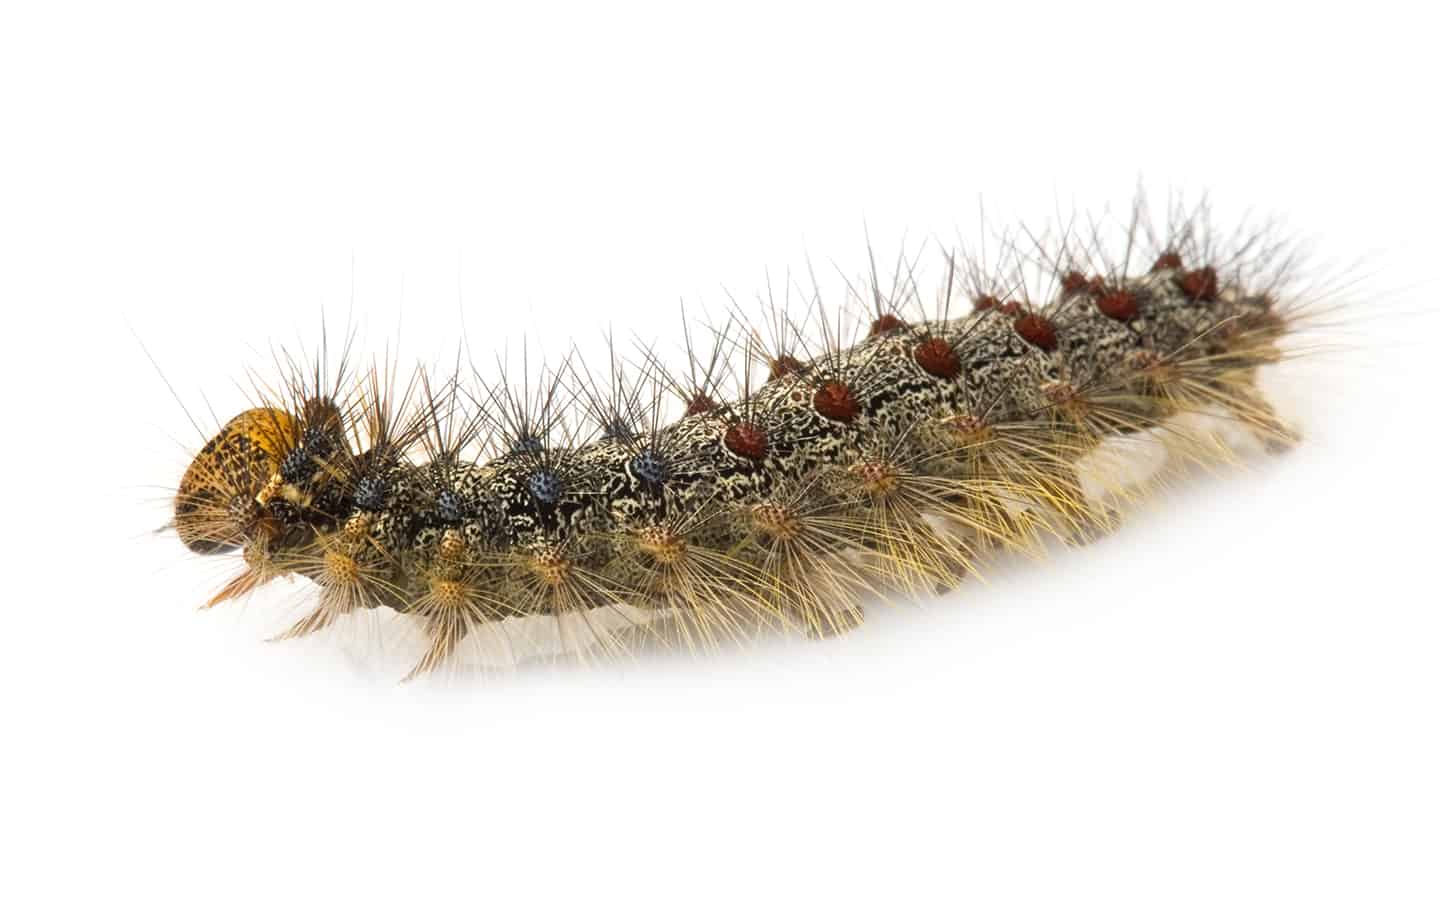 Gypsy moths continue to be a blight on the region